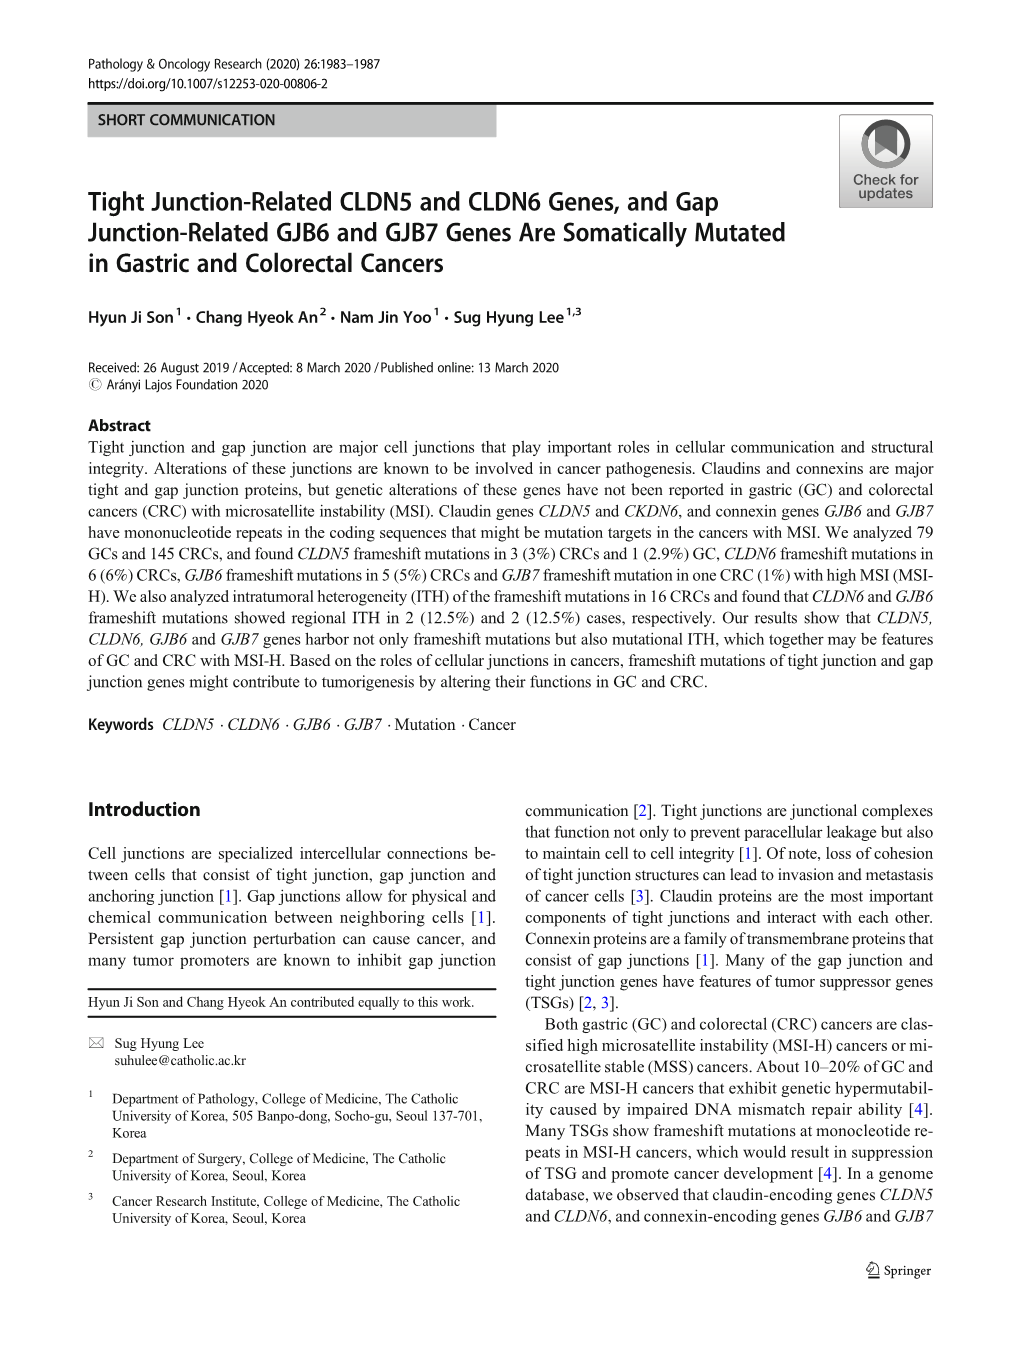 Tight Junction-Related CLDN5 and CLDN6 Genes, and Gap Junction-Related GJB6 and GJB7 Genes Are Somatically Mutated in Gastric and Colorectal Cancers